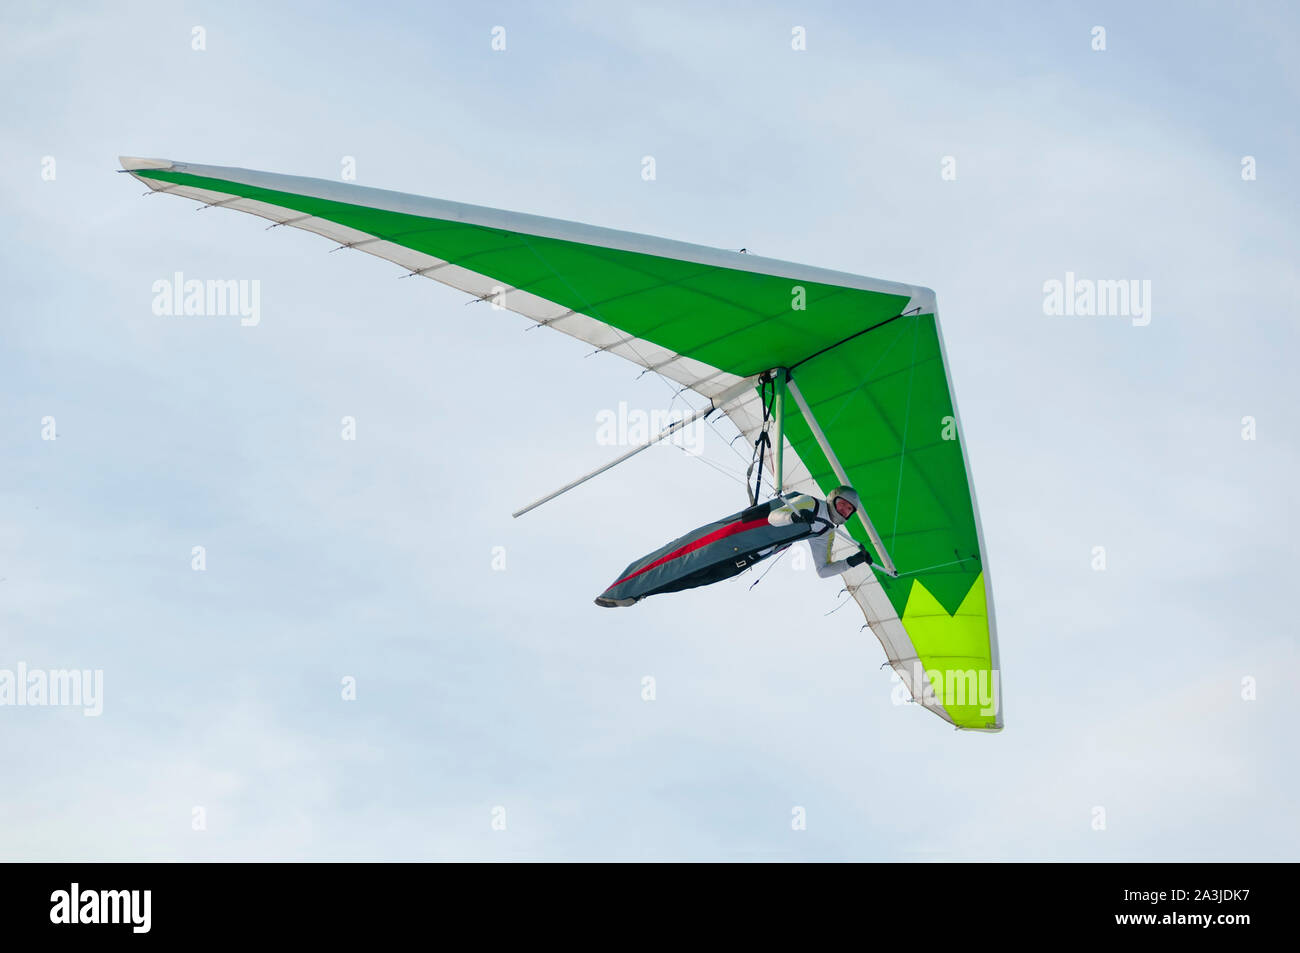 Hang glider wing silhouette. Pilot flies with his green kite wing Stock Photo